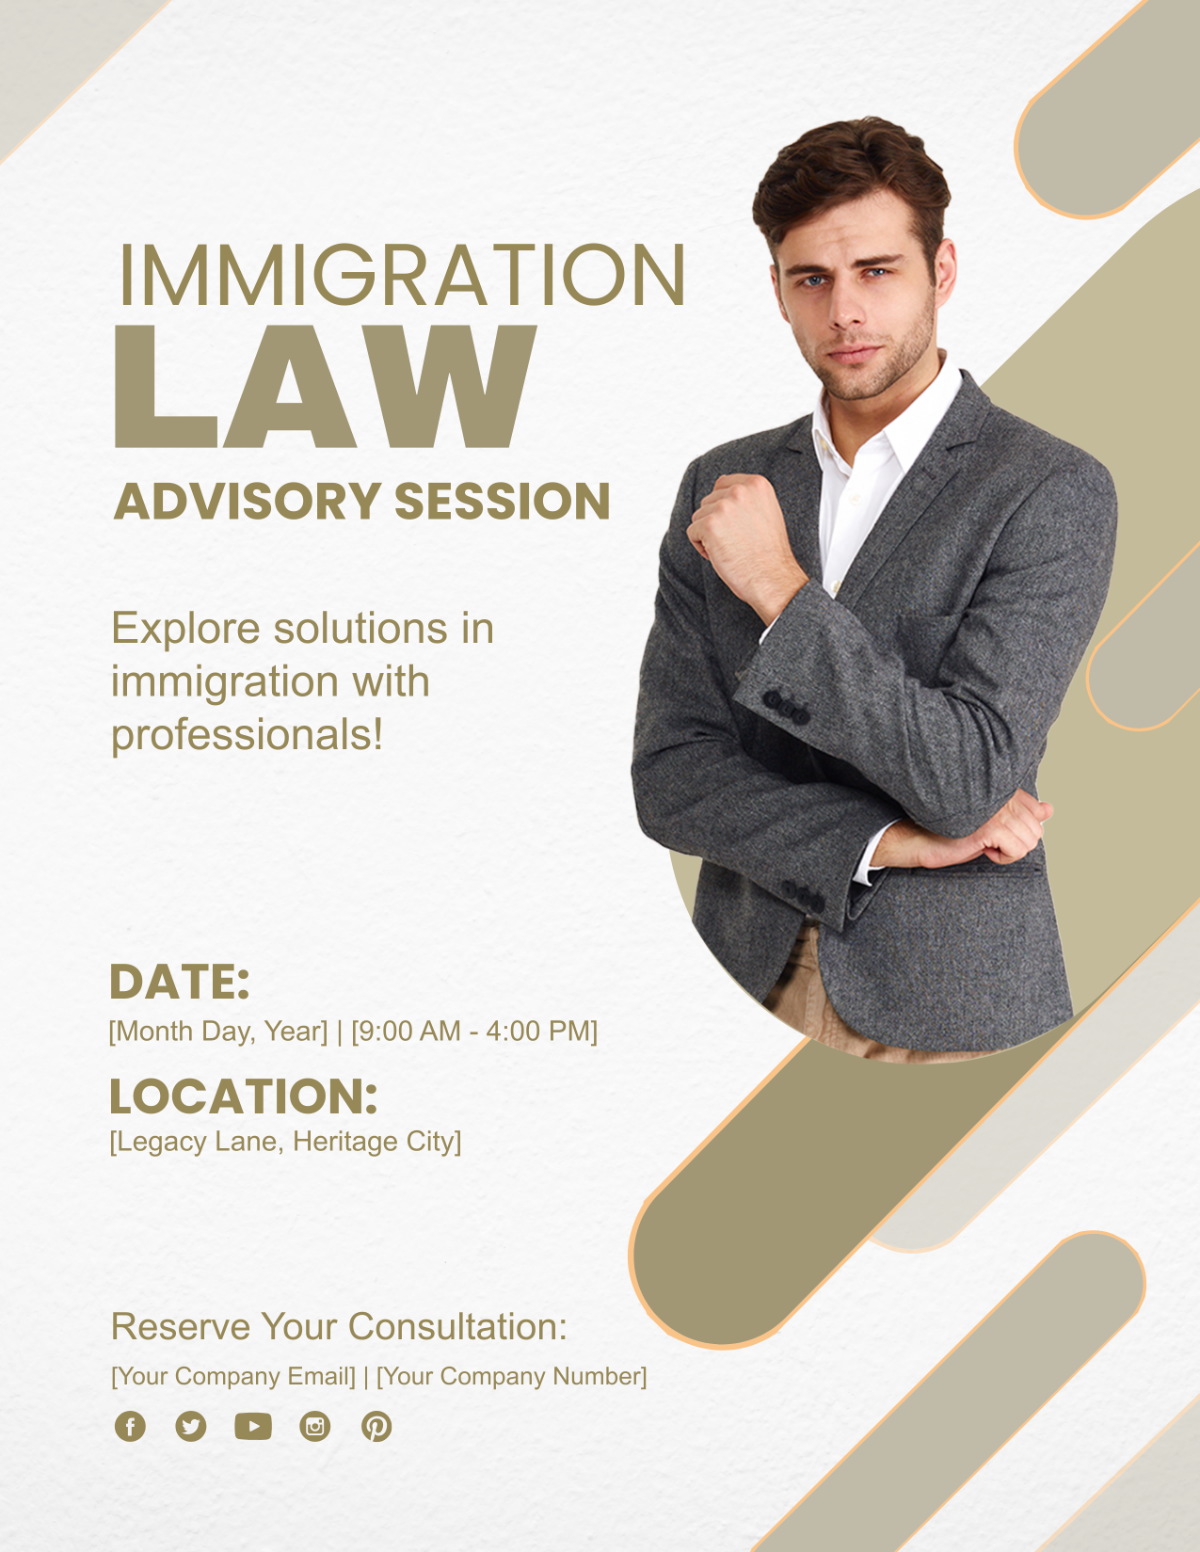 Immigration Law Advisory Session Flyer Template